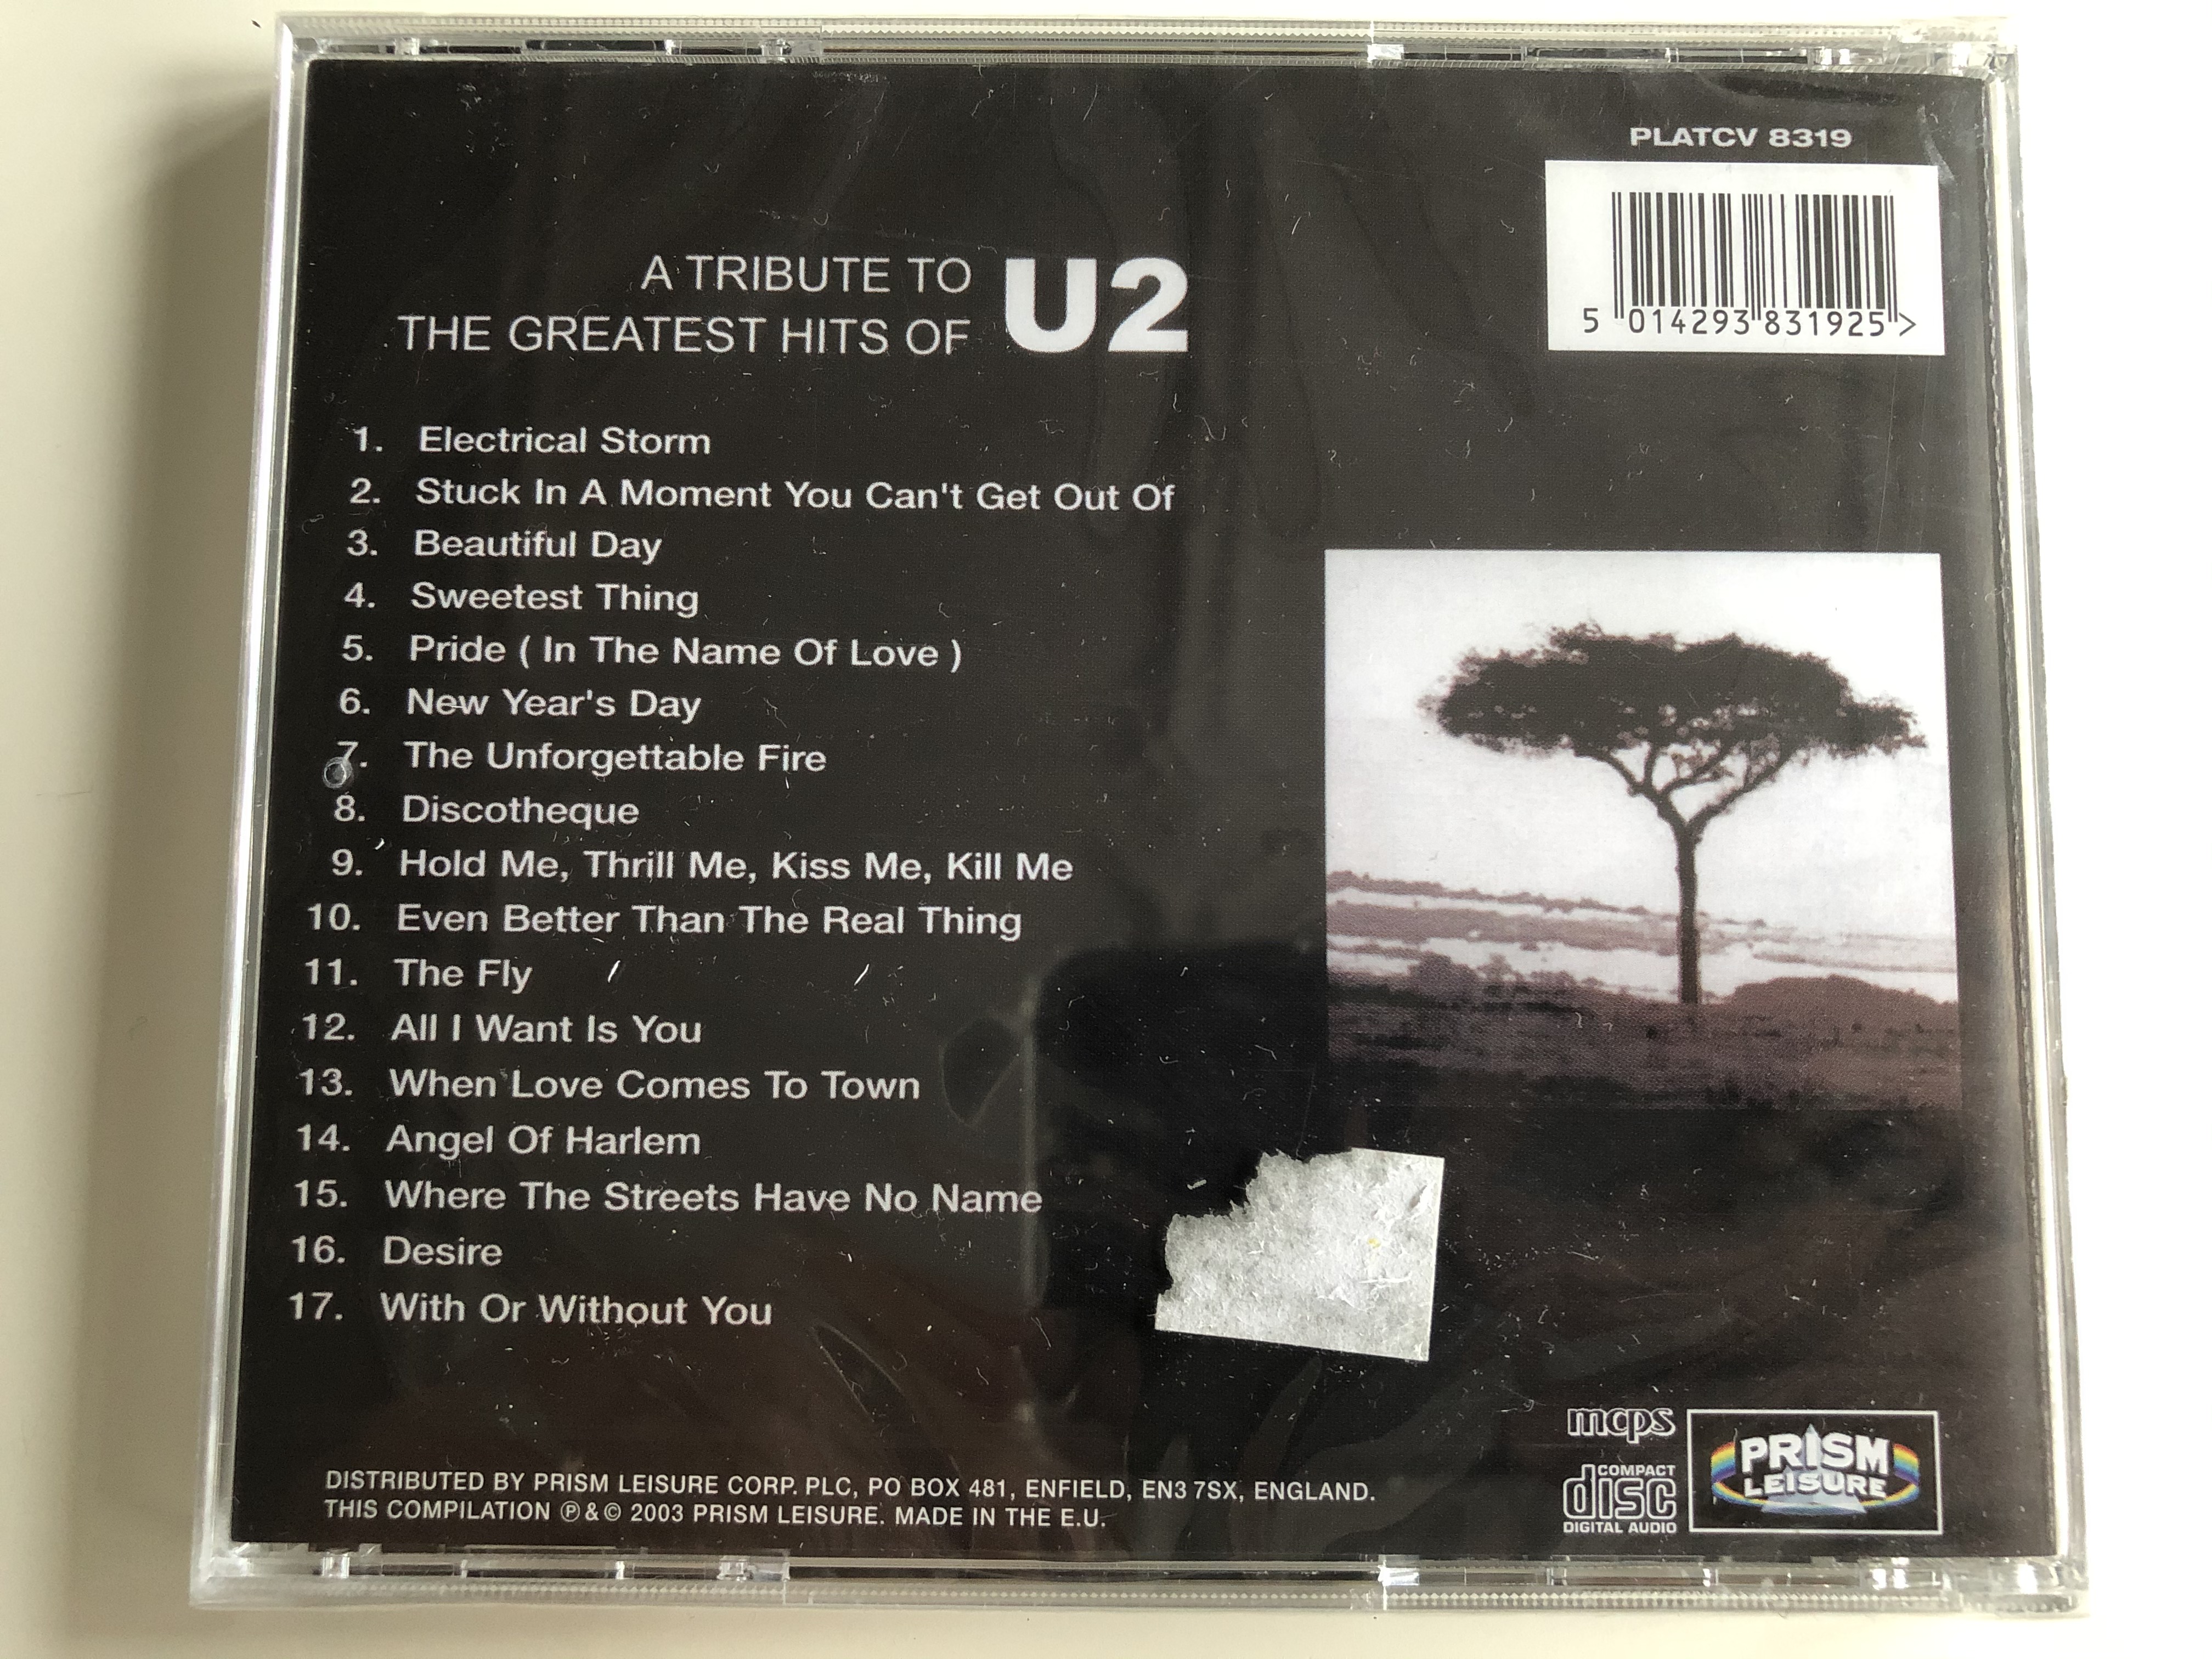 a-tribute-to-the-greatest-hits-of-u2-perfordmed-by-exit-featuring-where-the-streets-have-no-name-new-years-day-with-or-without-you-beautiful-day-prism-leisure-audio-cd-2003-platcv-8319-.jpg